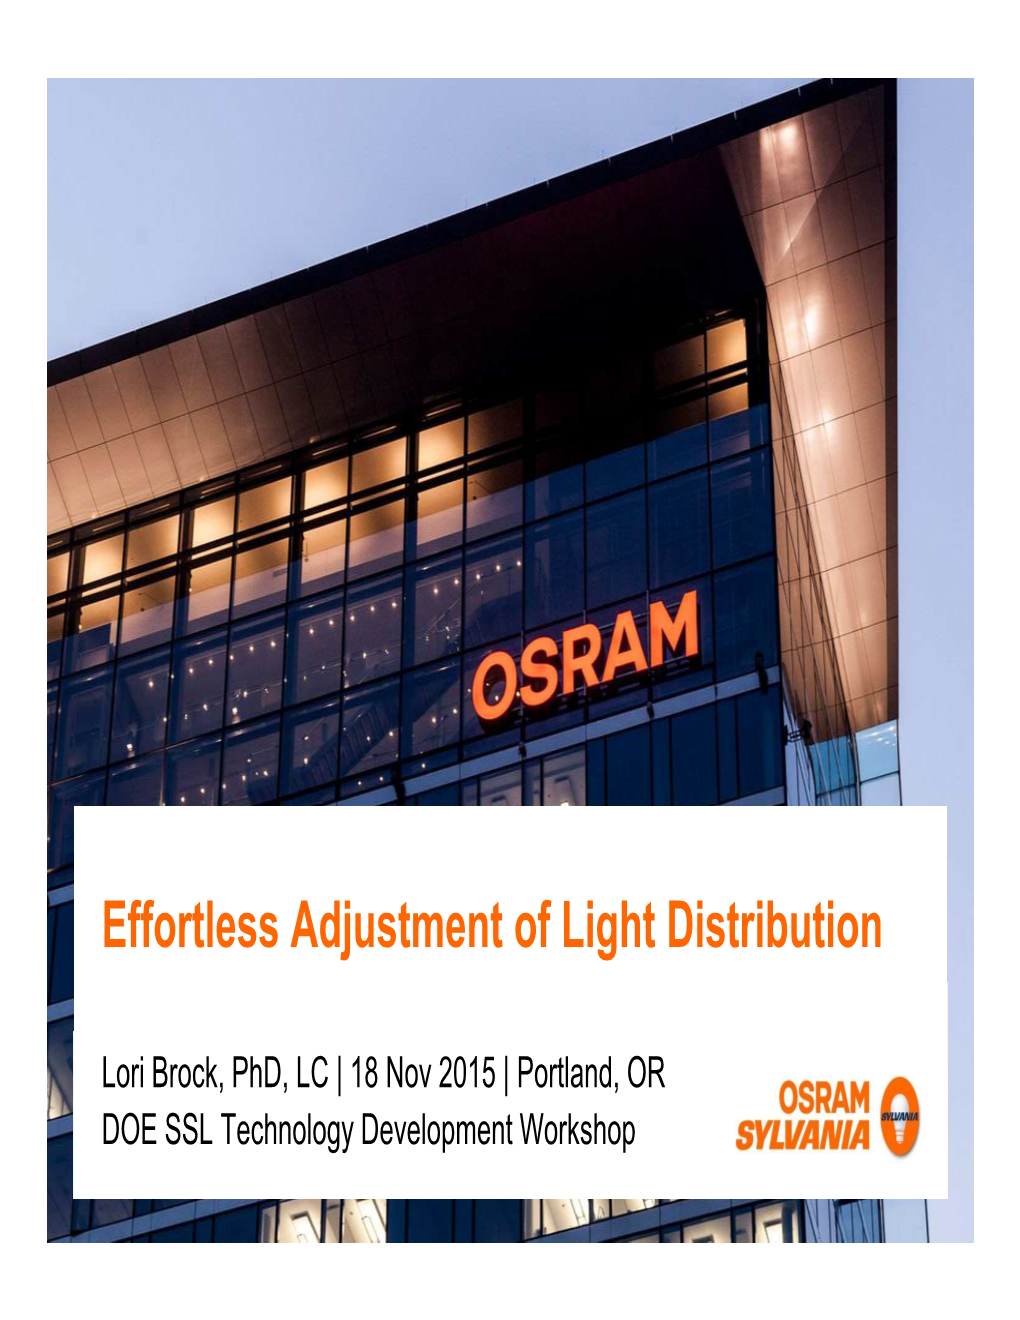 Changing Technology and Business Practices: Lori Brock, OSRAM